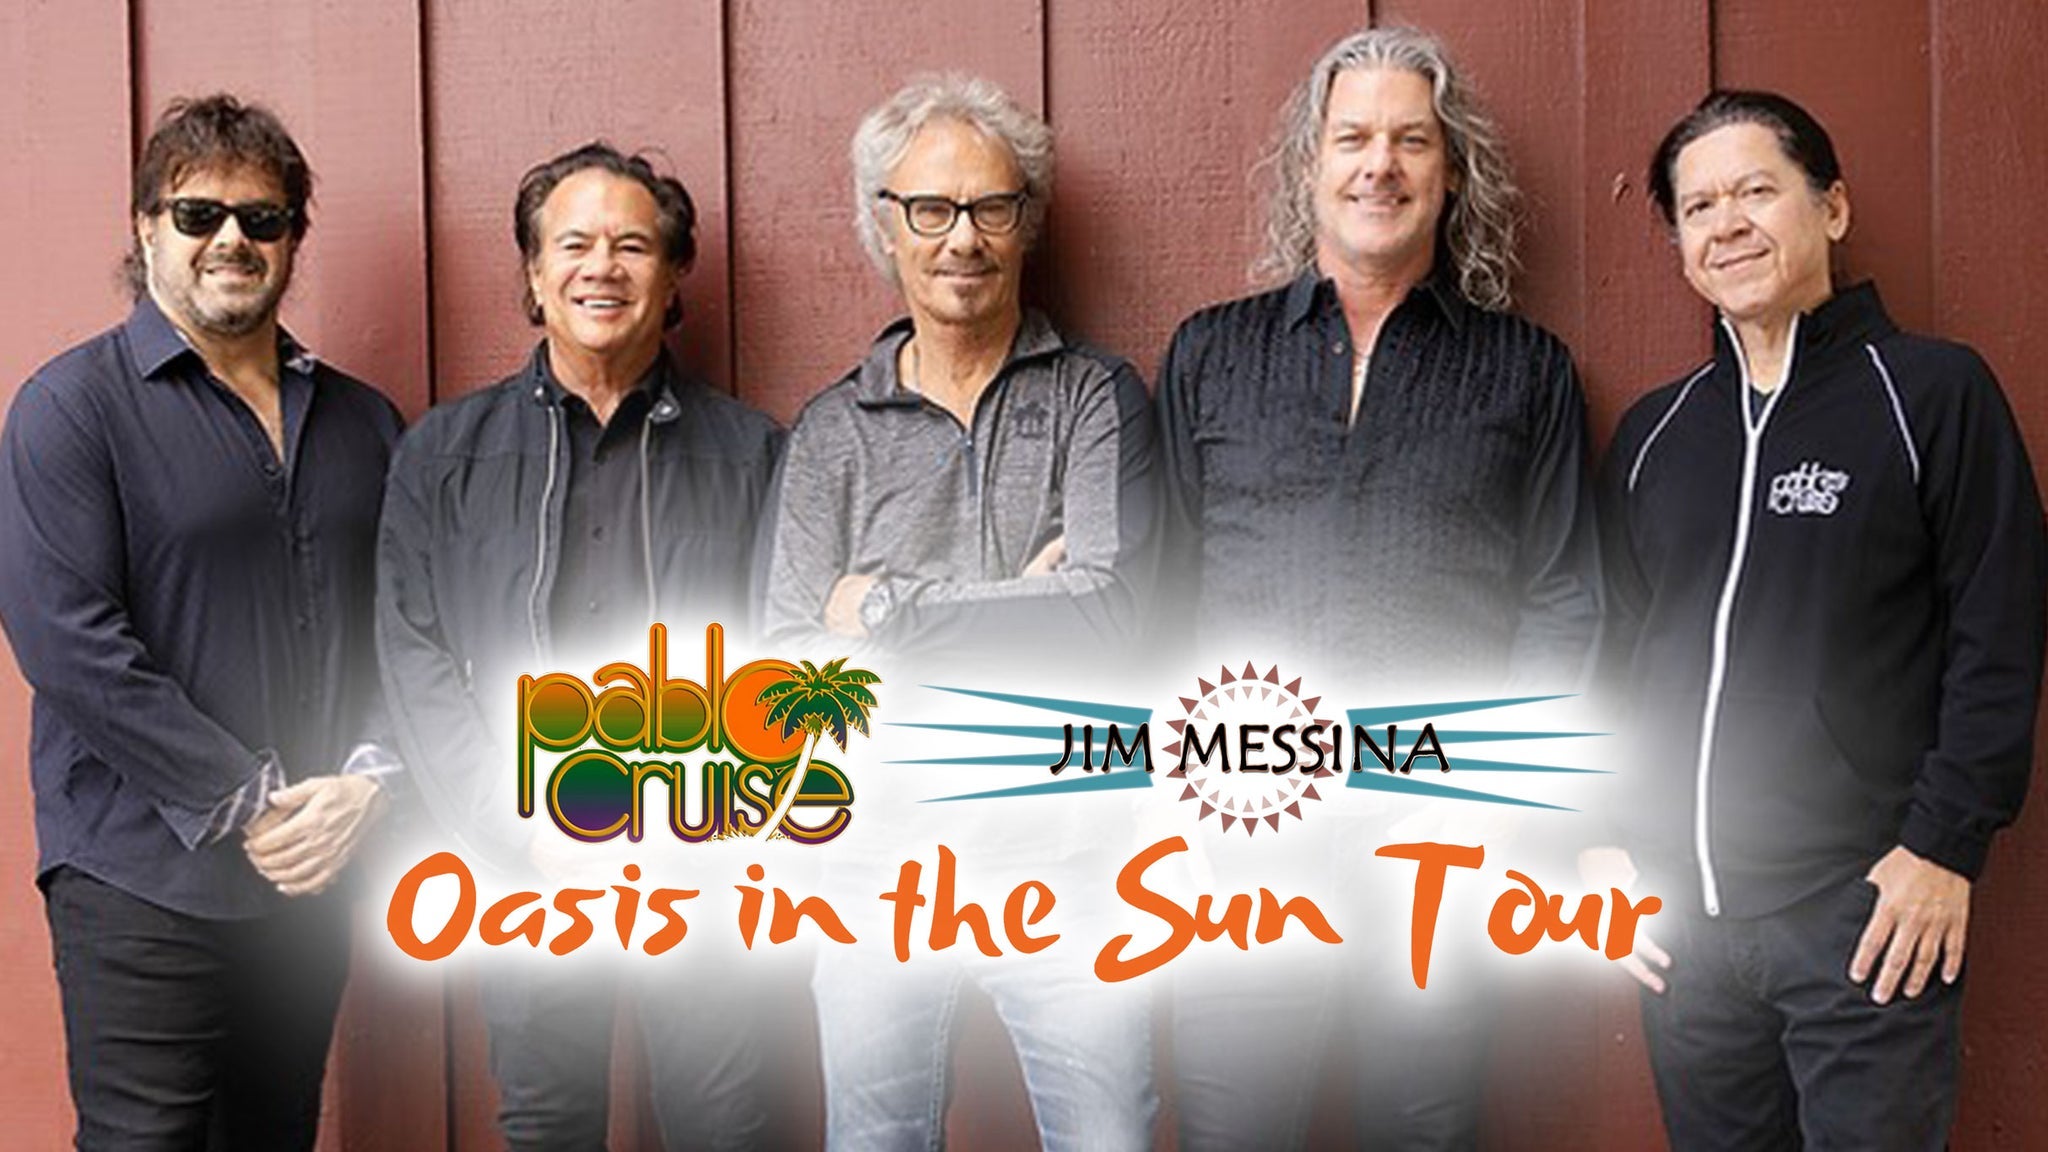 accurate presale password for Pablo Cruise & Jim Messina face value tickets in Virginia Beach